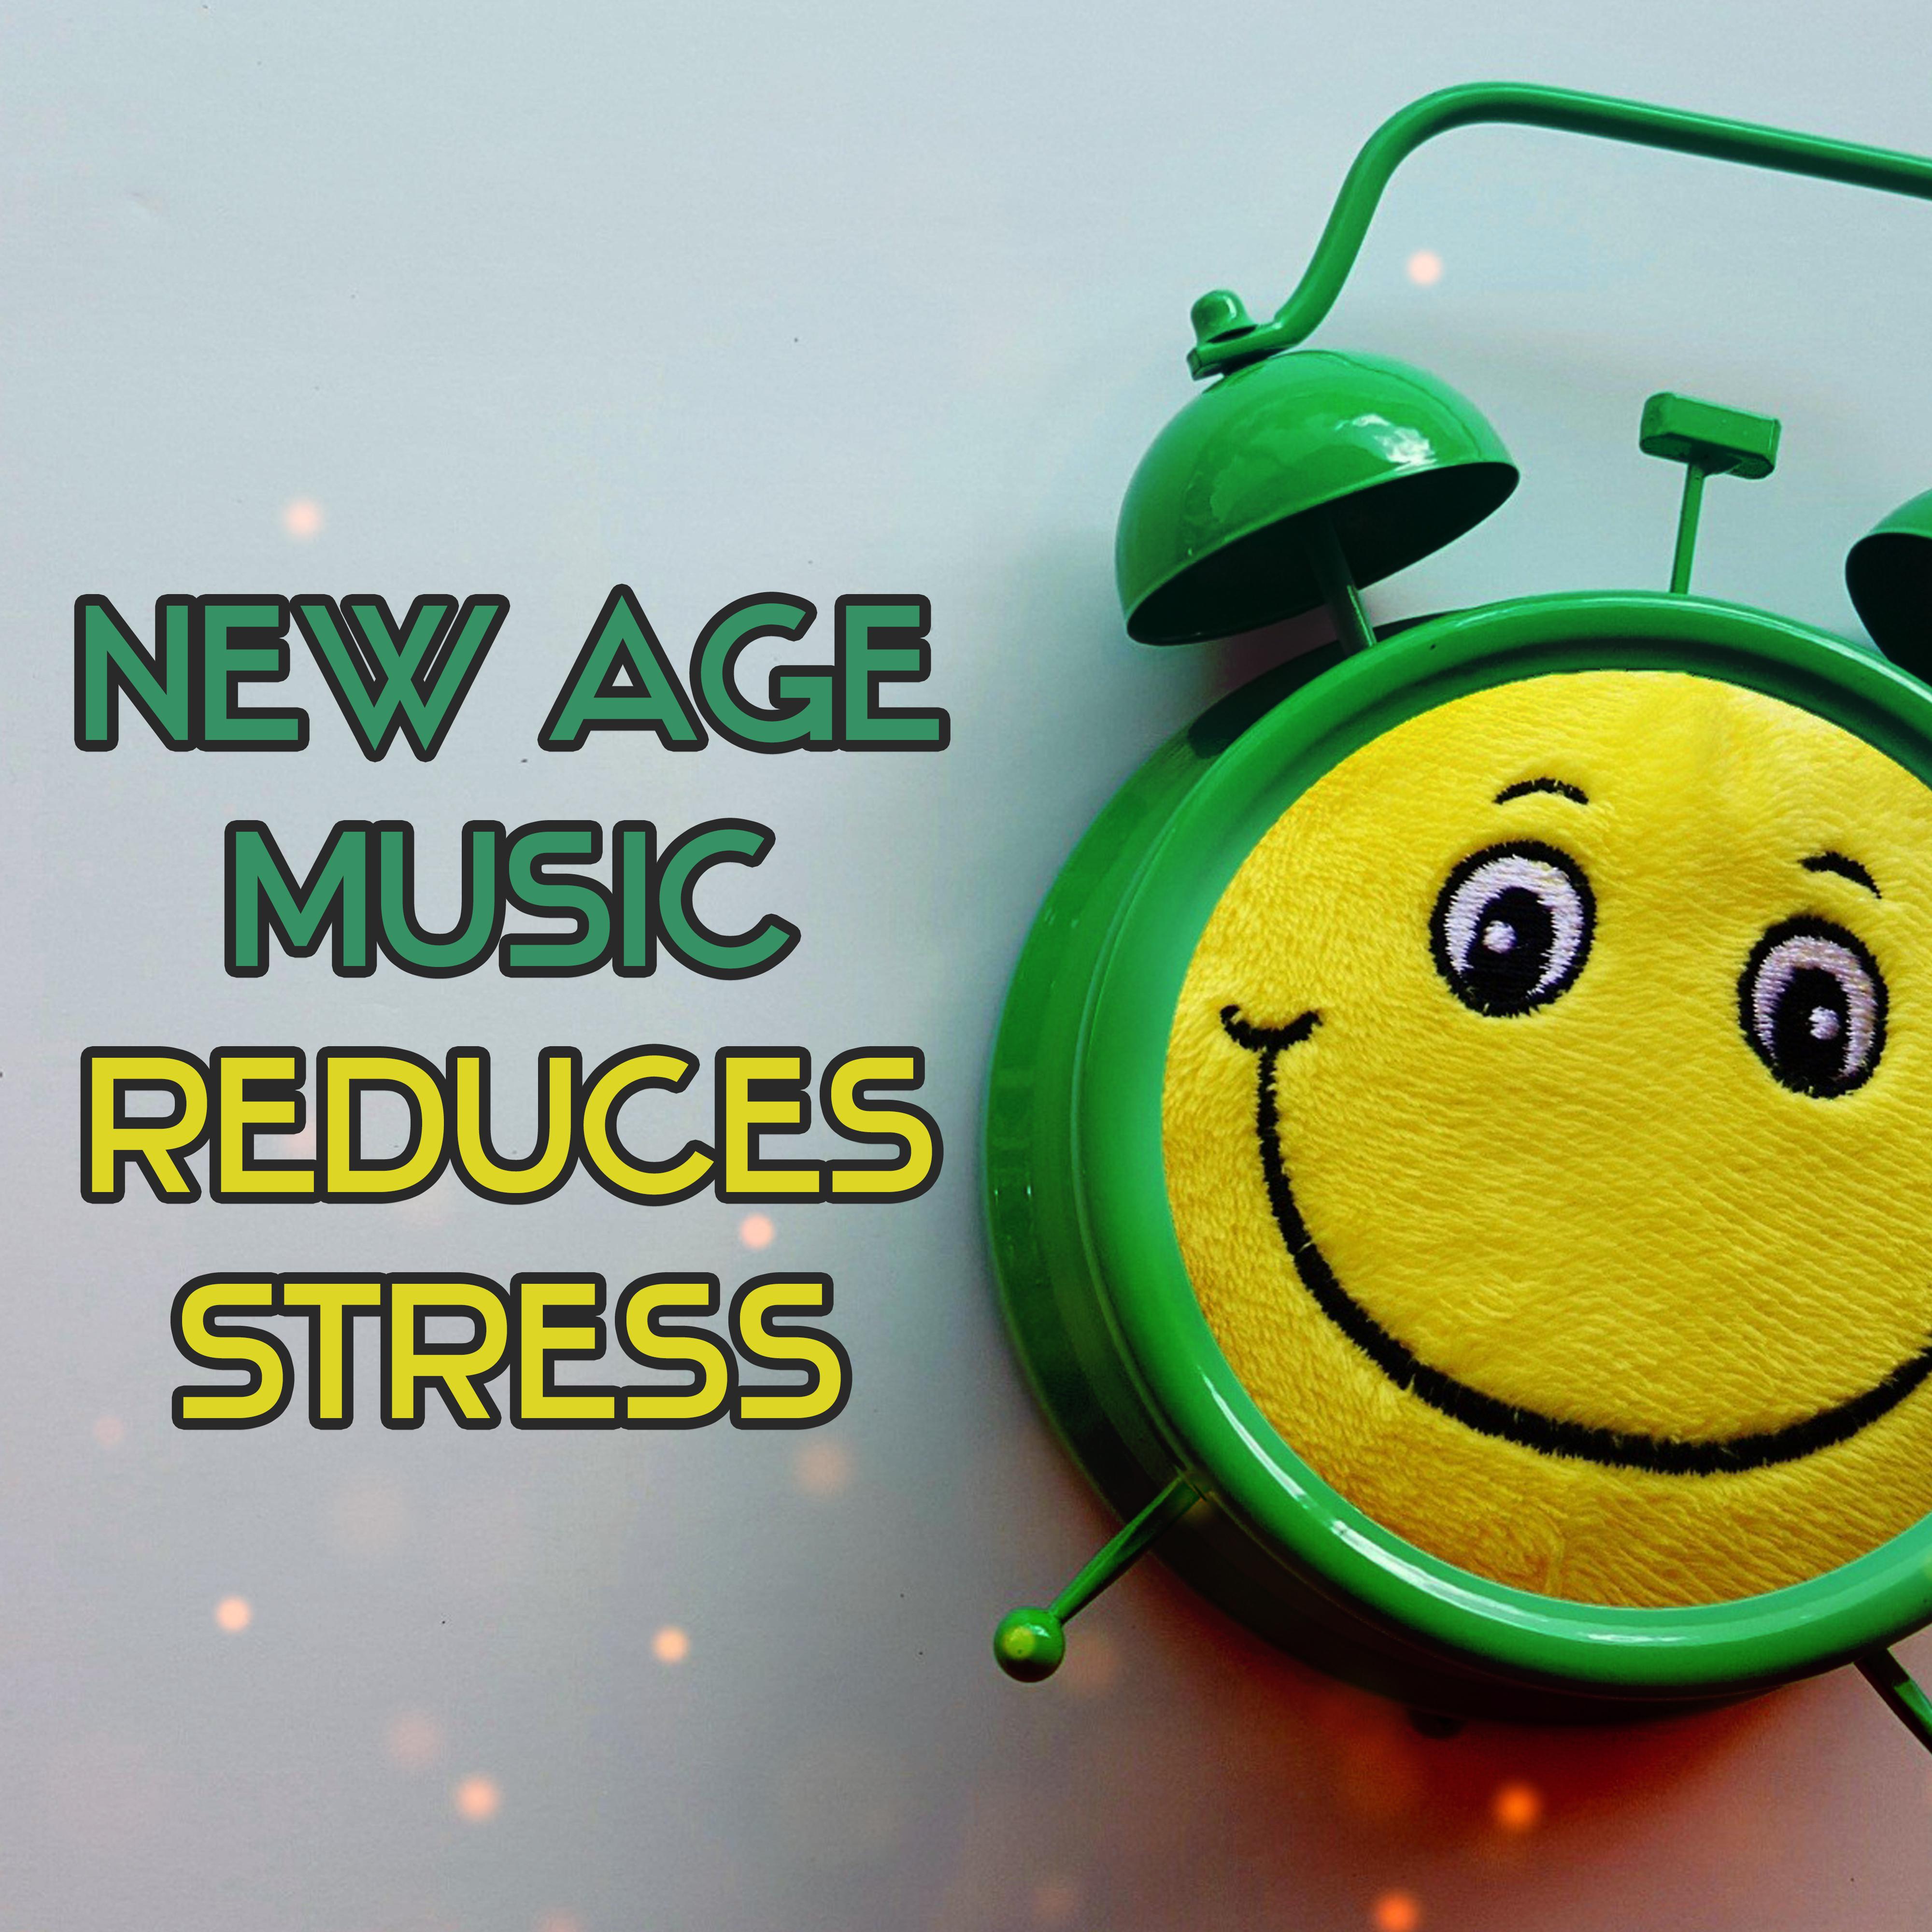 New Age Music Reduces Stress – Inner Calmness, Healing Music to Calm Down, Deep Sleep, Ambient Music, Relaxation Sounds to Rest